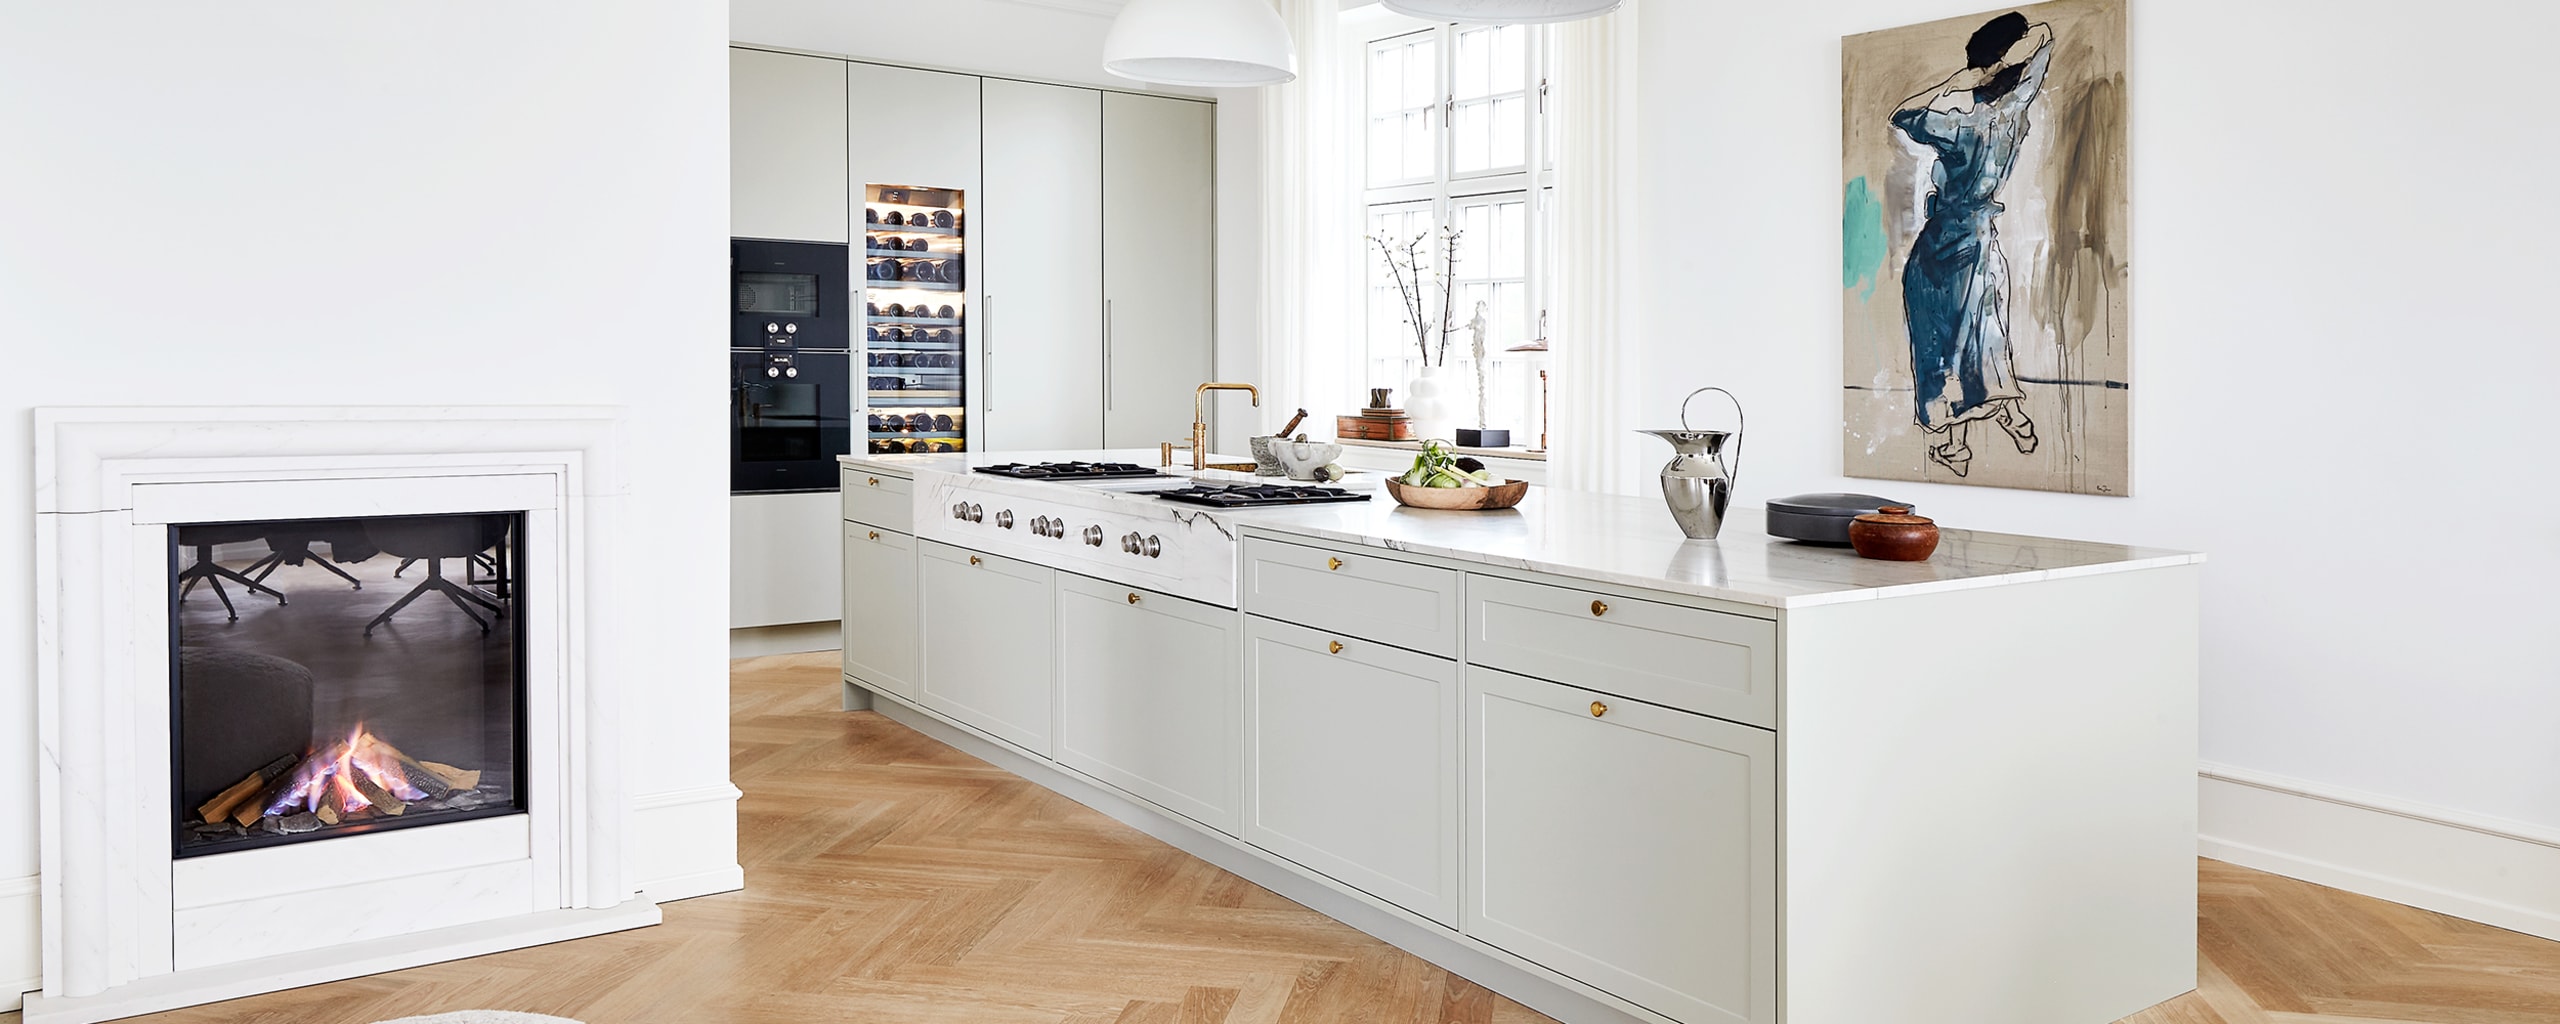 A bespoke kitchen in a classic, Nordic design that matches the mansion's original architecture from the beginning of the 20th century.